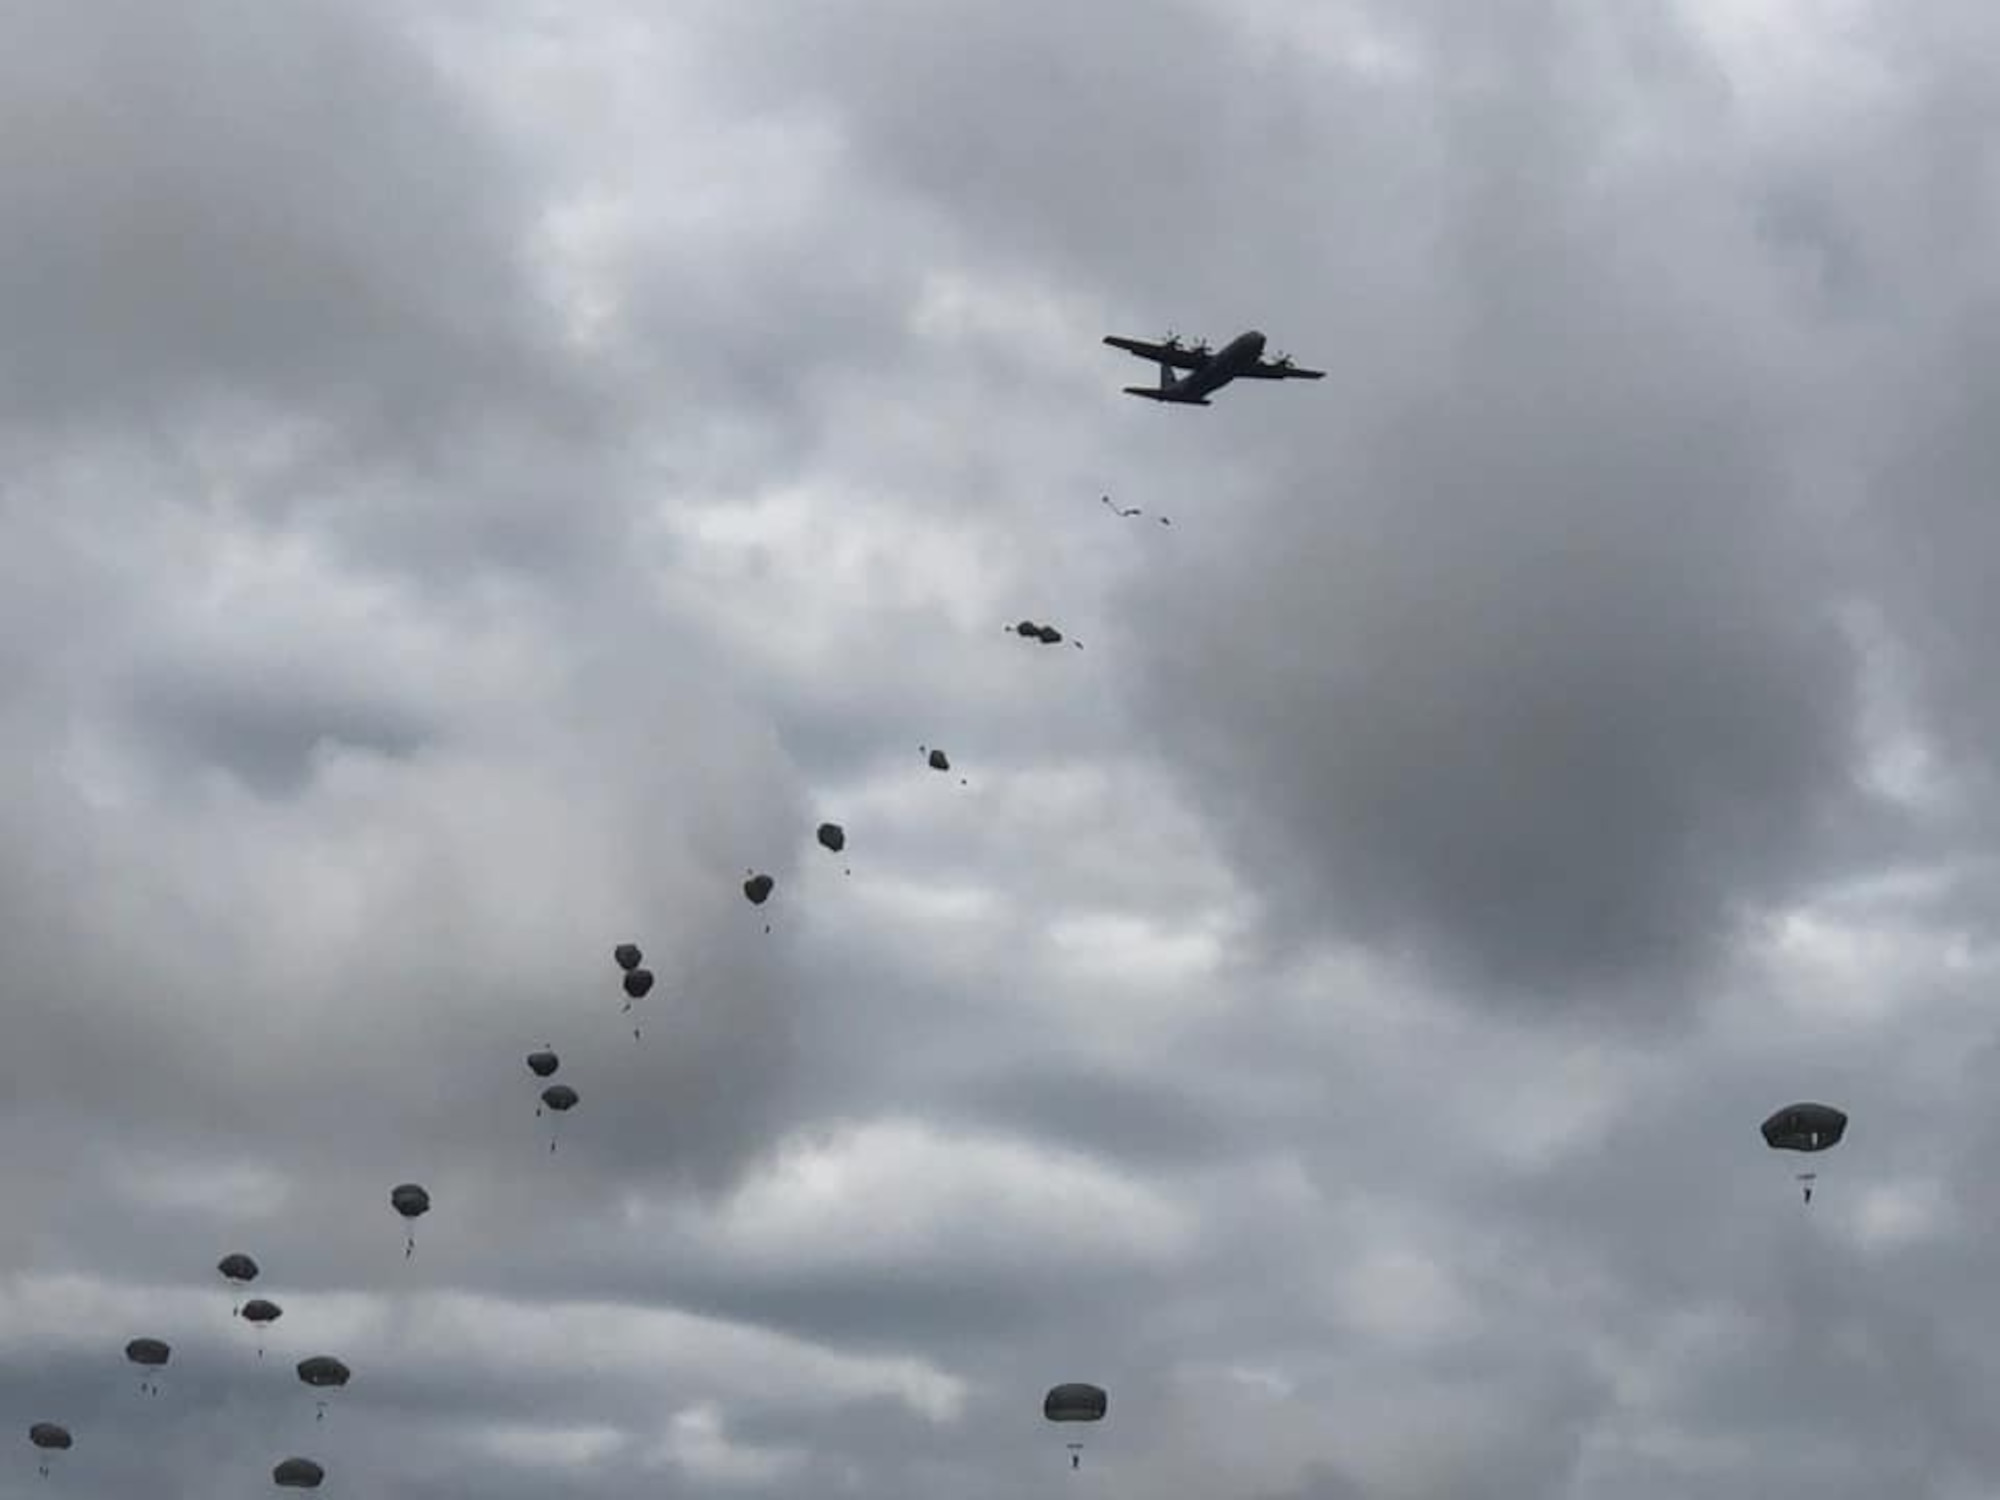 U.S. Army paratroopers descend from the sky after jumping out of C-130J Super Hercules aircraft from Little Rock Air Force Base, Arkansas, in support of airborne operations at the Joint Readiness Training Center in Fort Polk, Louisiana, May 26, 2020. The training allowed more than 140 U.S. Army Soldiers to recertify their status, both as paratroopers and jumpmasters. (Courtesy photo)